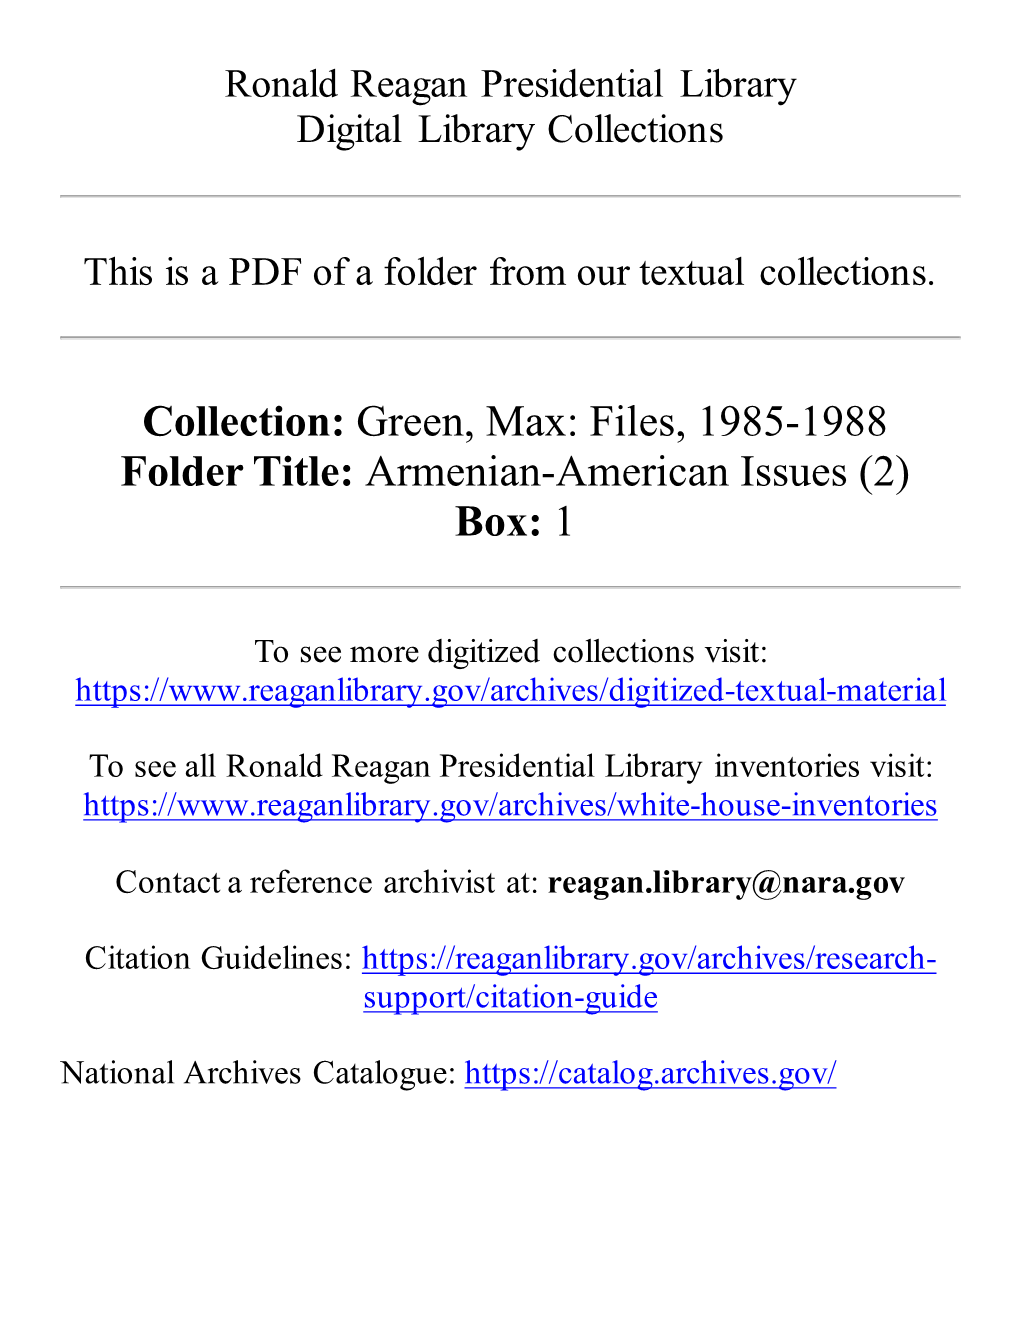 Collection: Green, Max: Files, 1985-1988 Folder Title: Armenian-American Issues (2) Box: 1